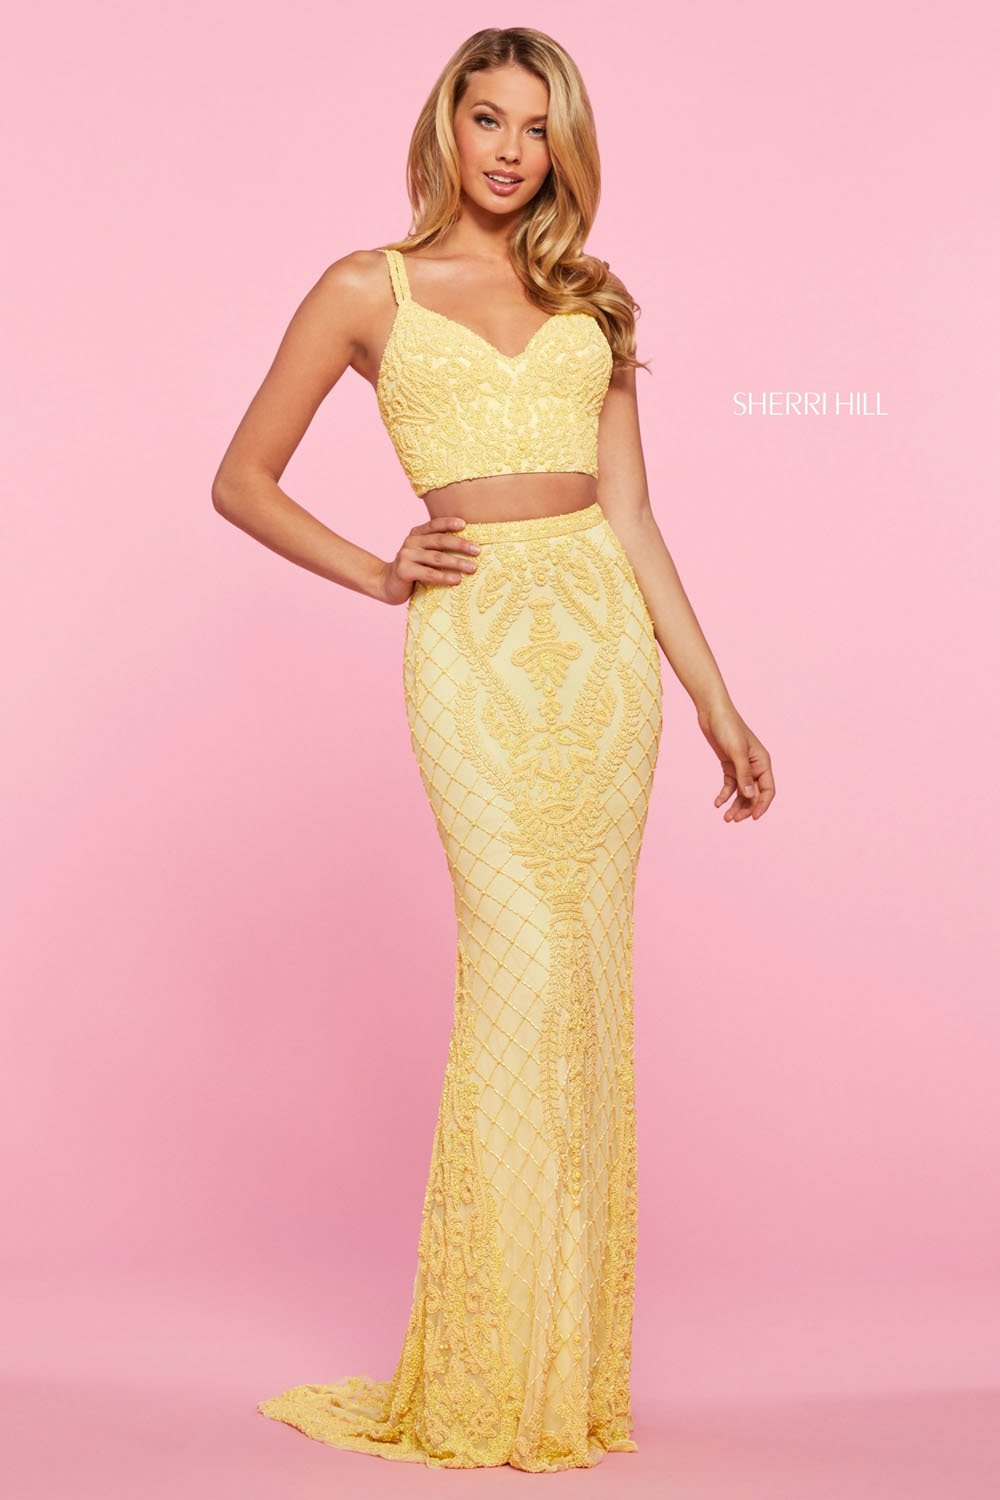 Sherri Hill 53437 dress images in these colors: Periwinkle Ivory, Yellow, Nude Black, Black Ivory.